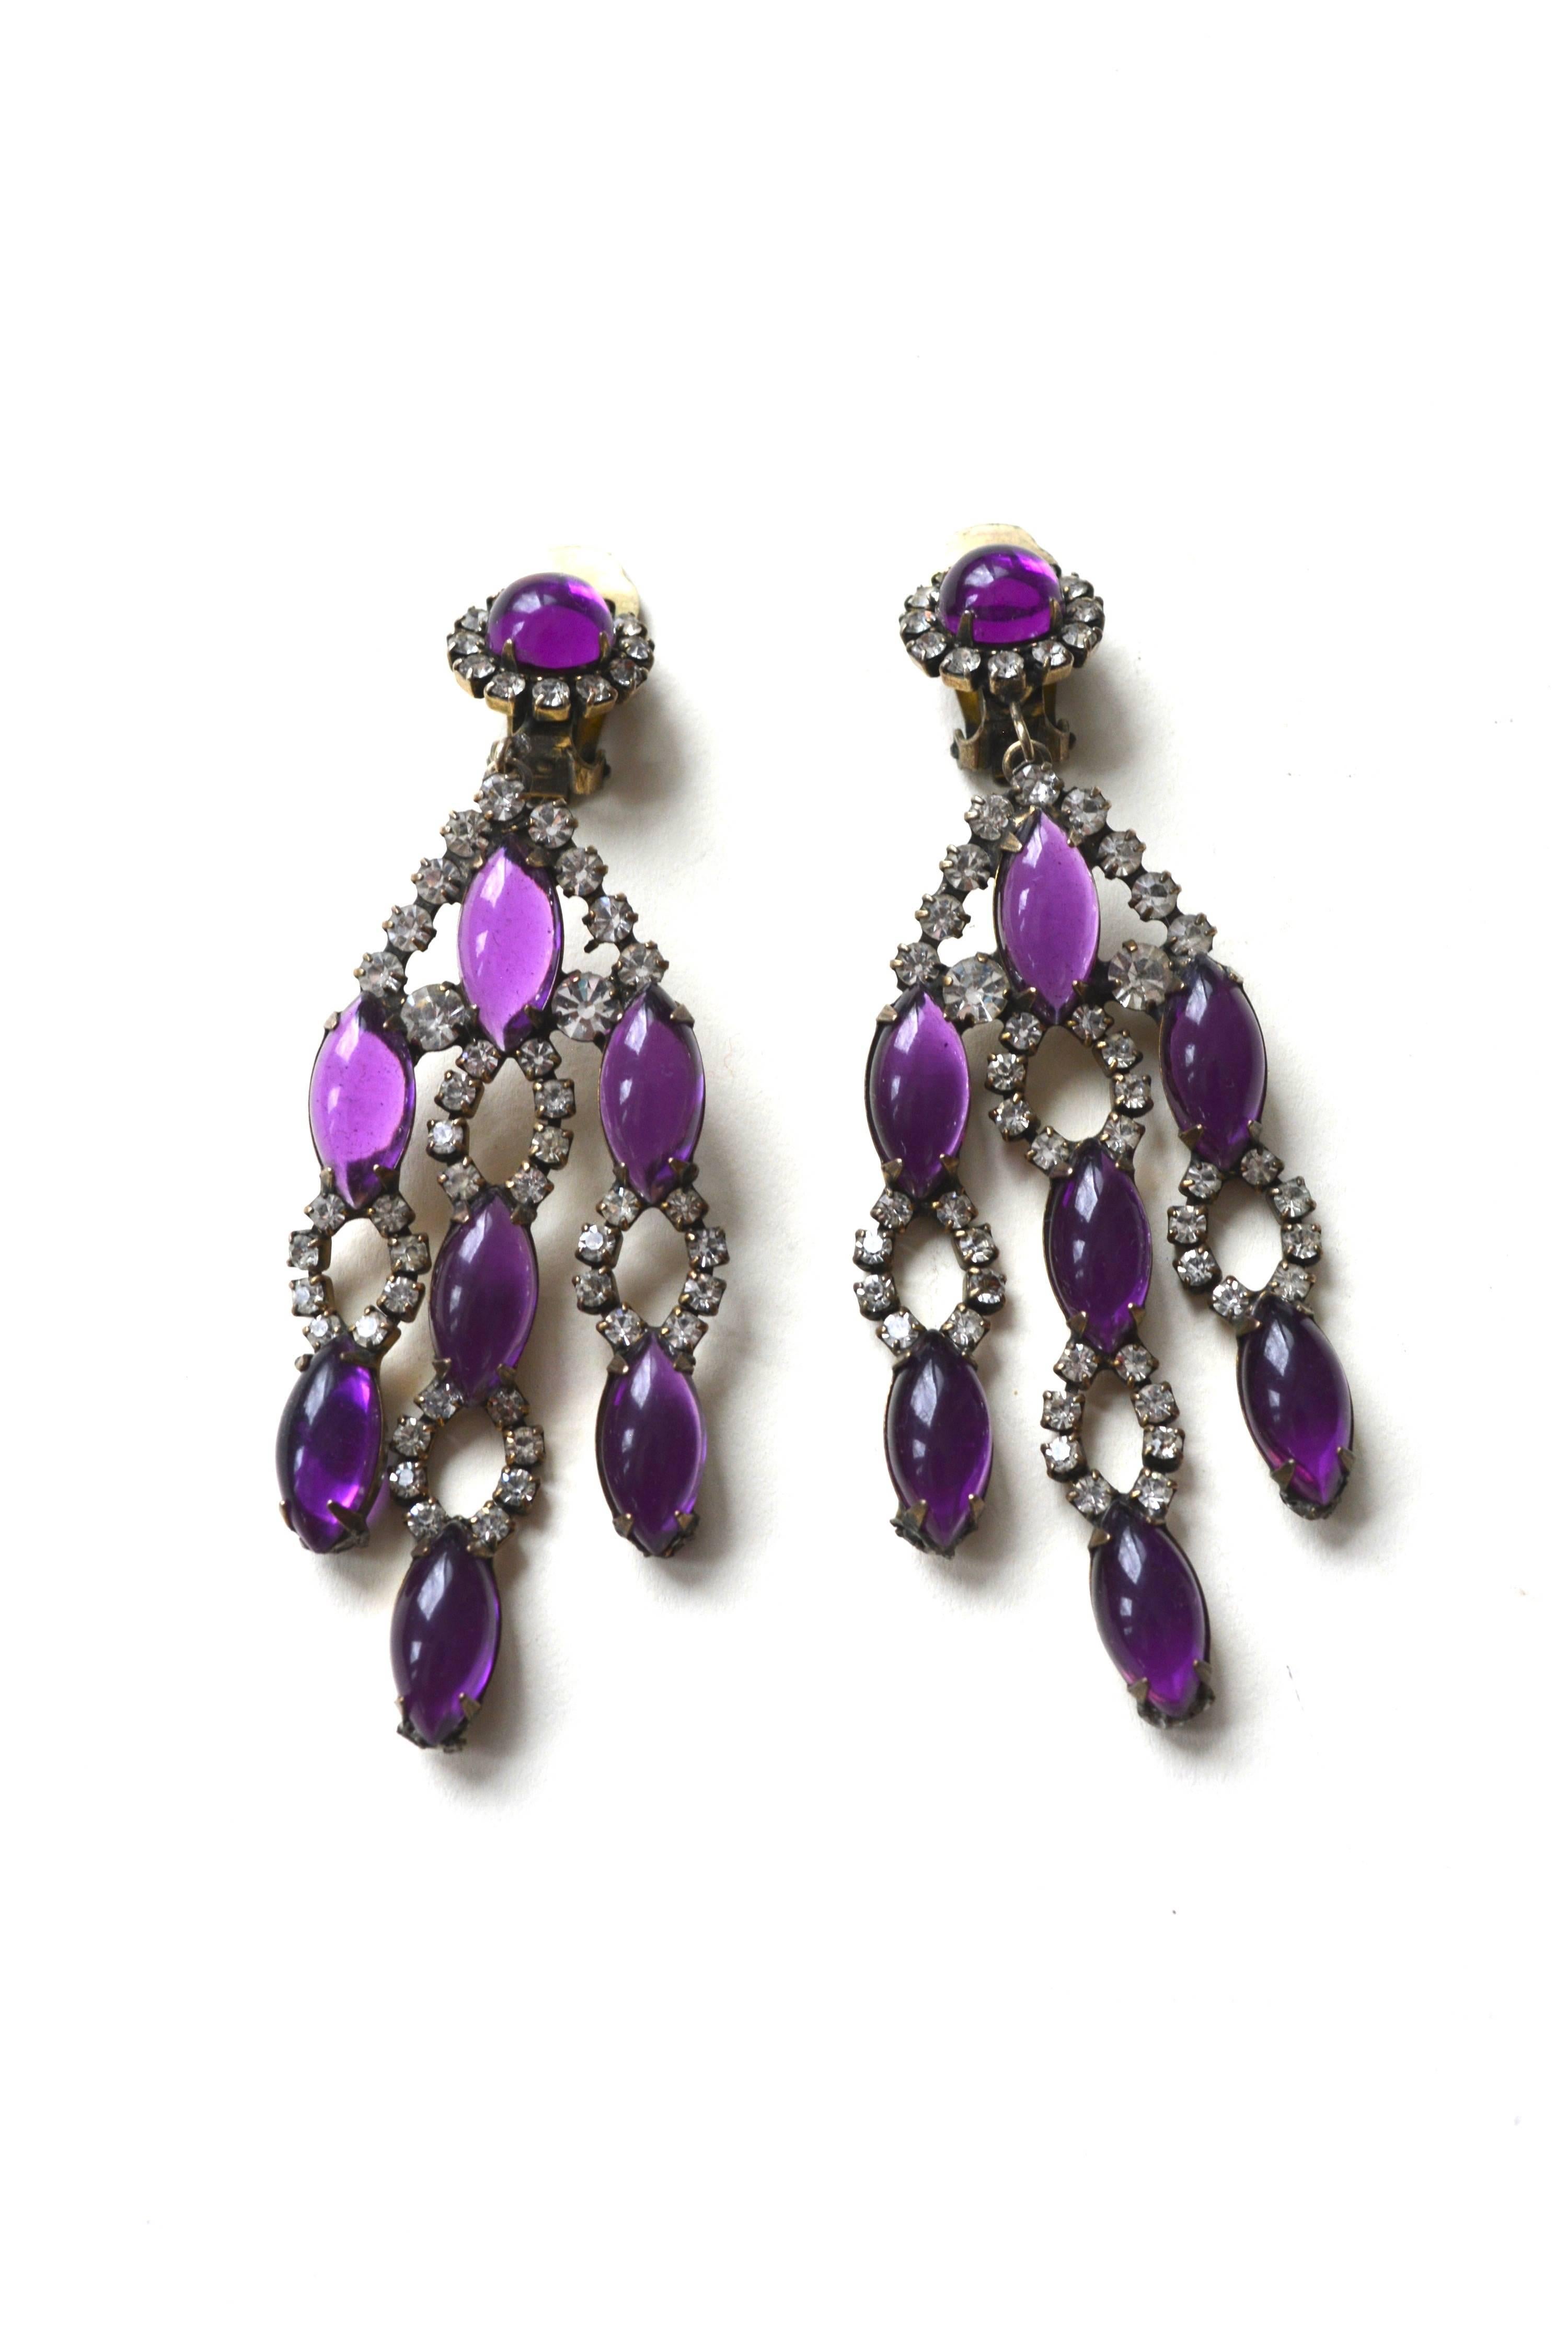 Lux purple KJL earrings signed with the 1960s signature style. Antiqued finish.  Excellent condition. About 3.25